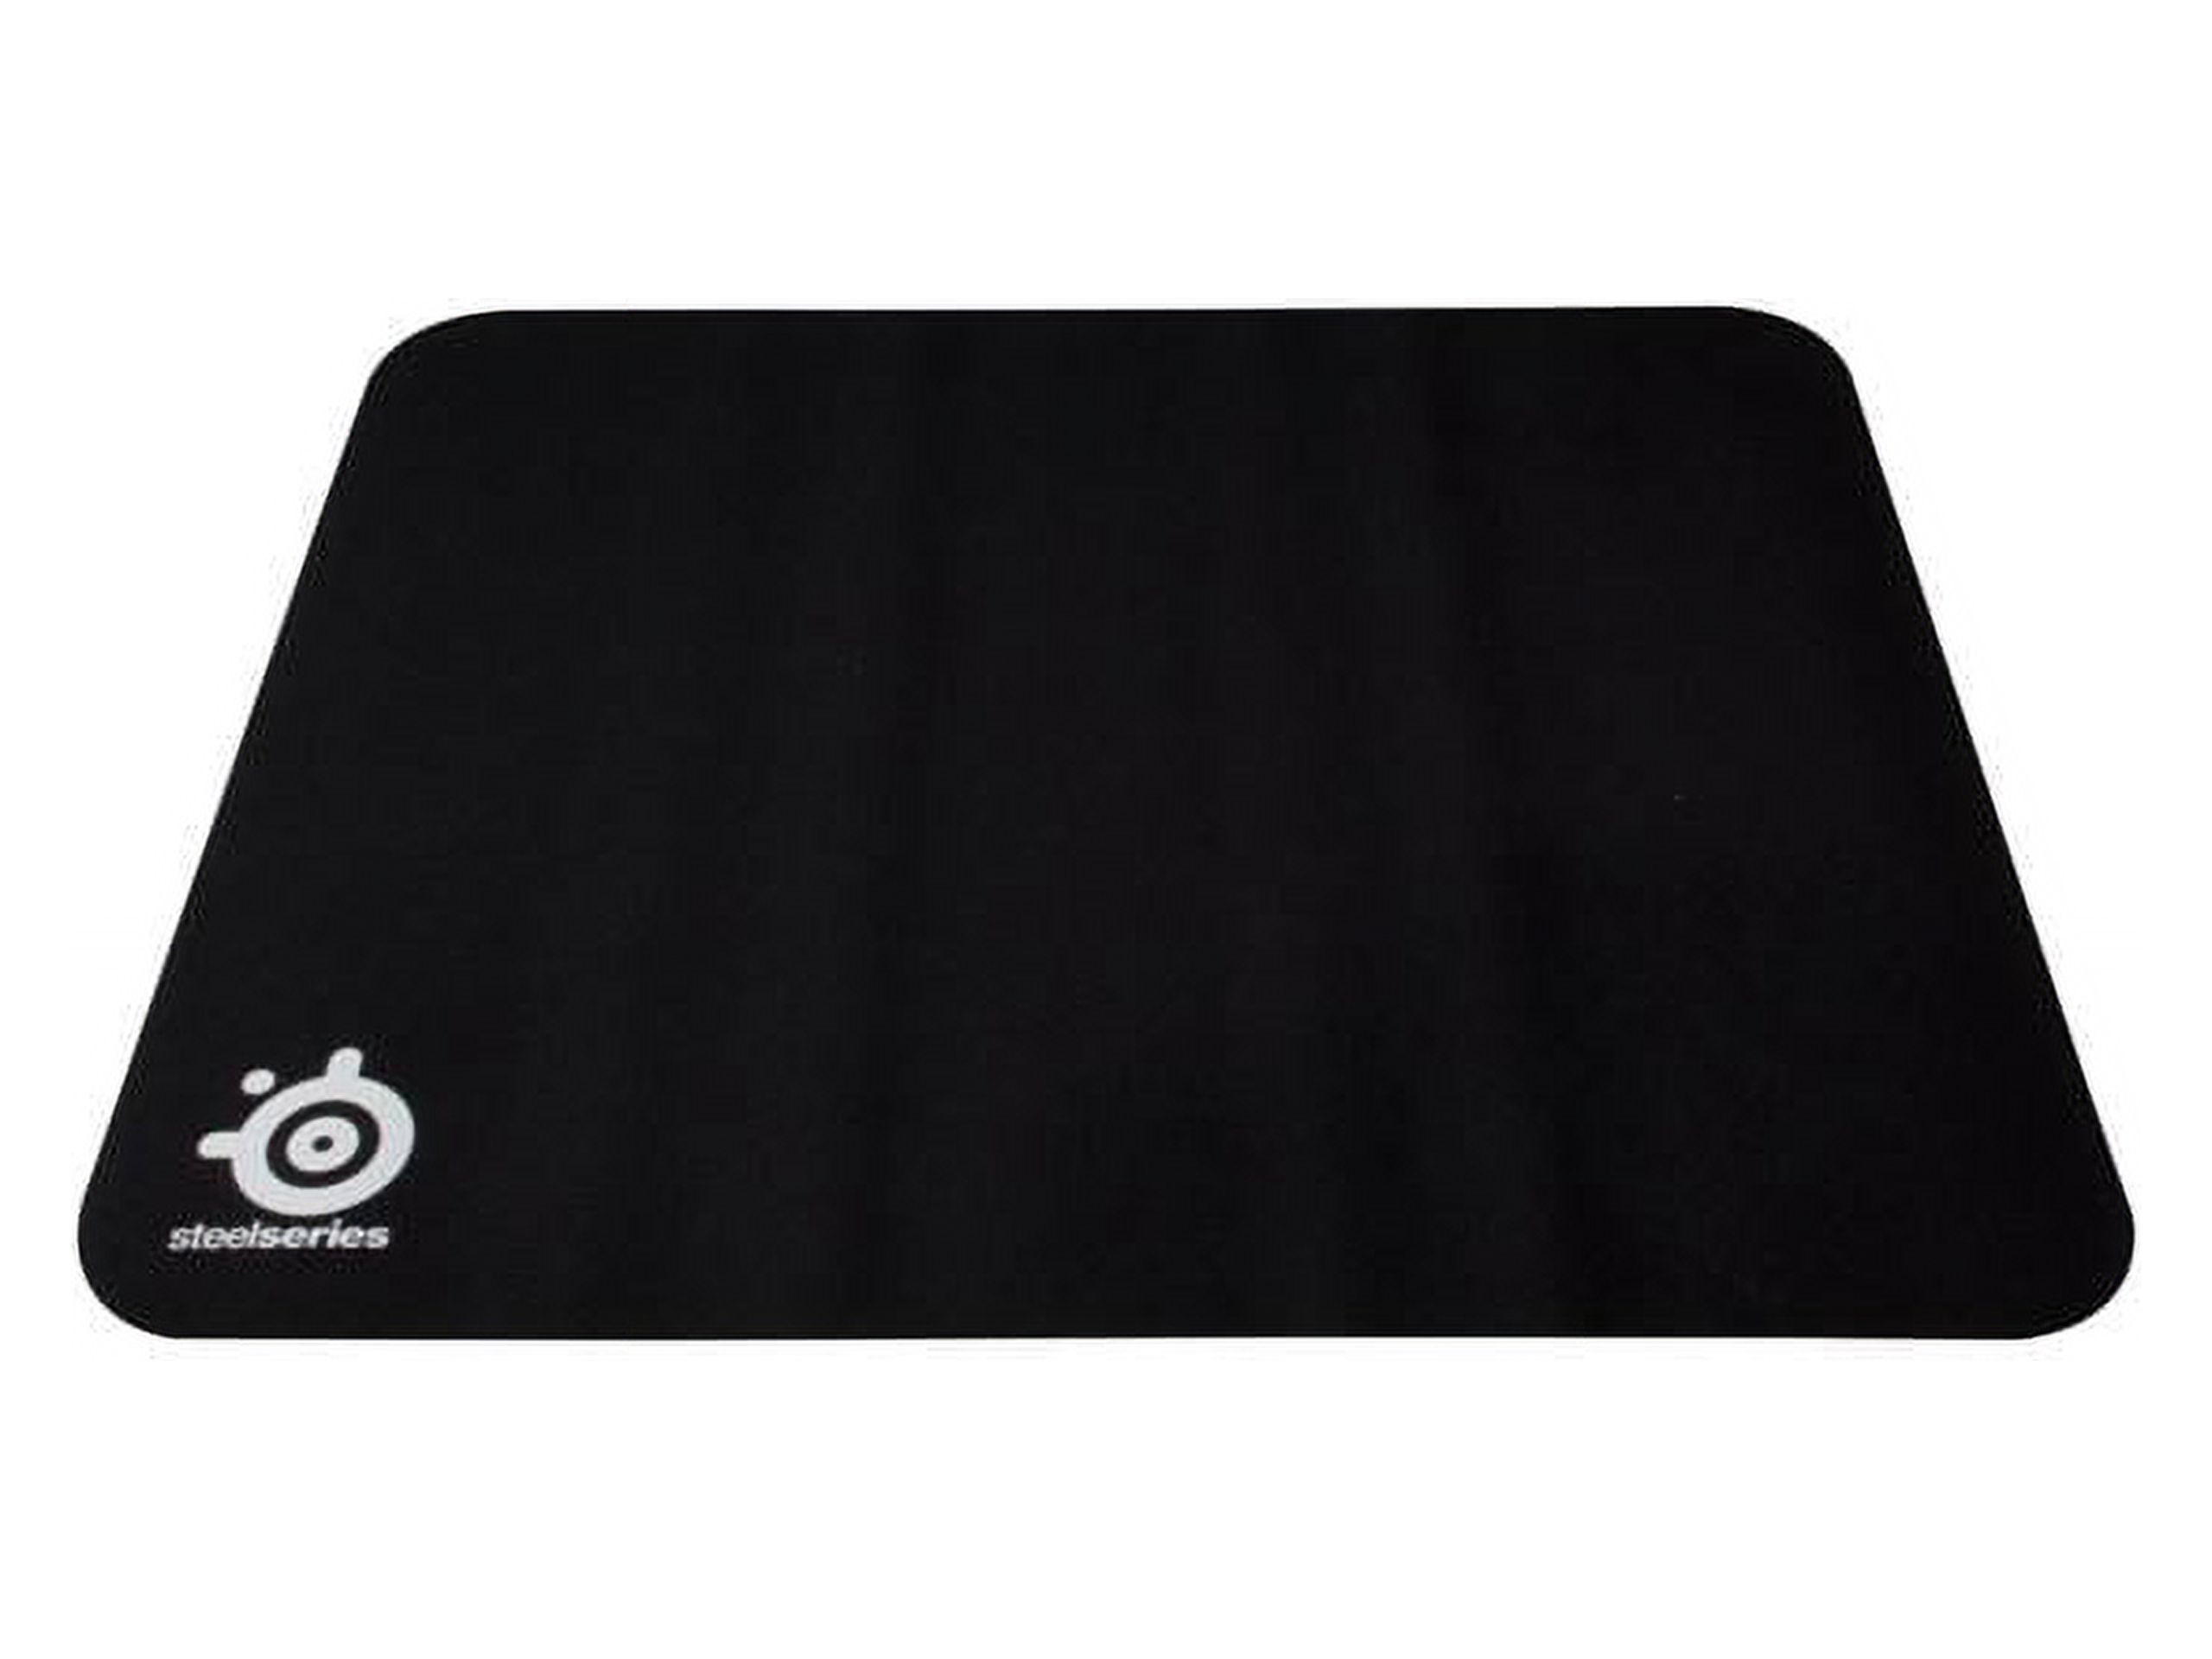 SteelSeries QcK+ Mouse Pad - image 3 of 6